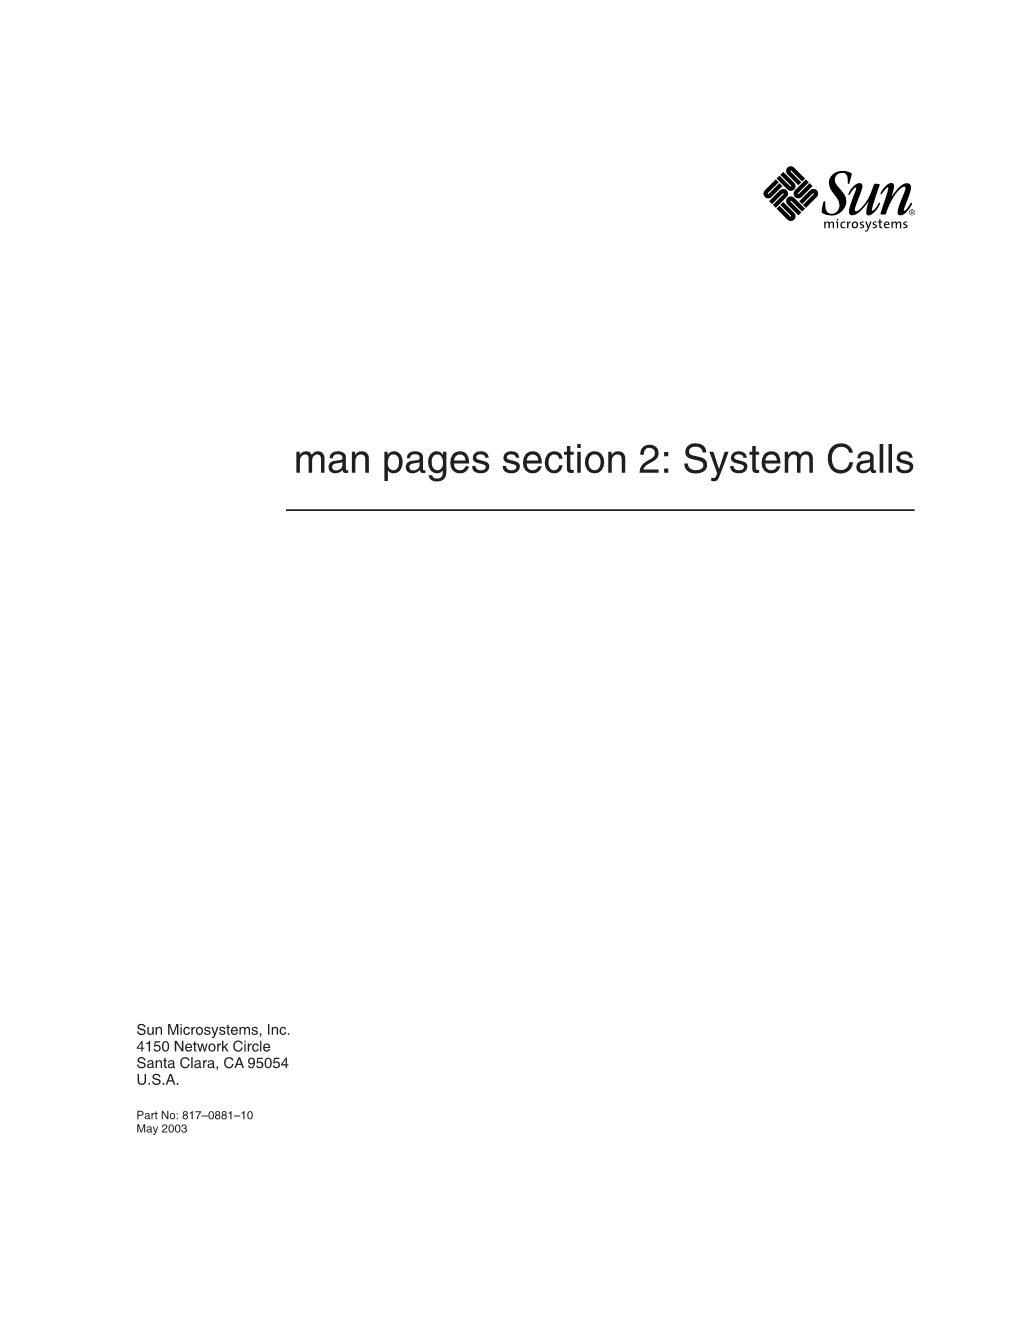 Man Pages Section 2: System Calls